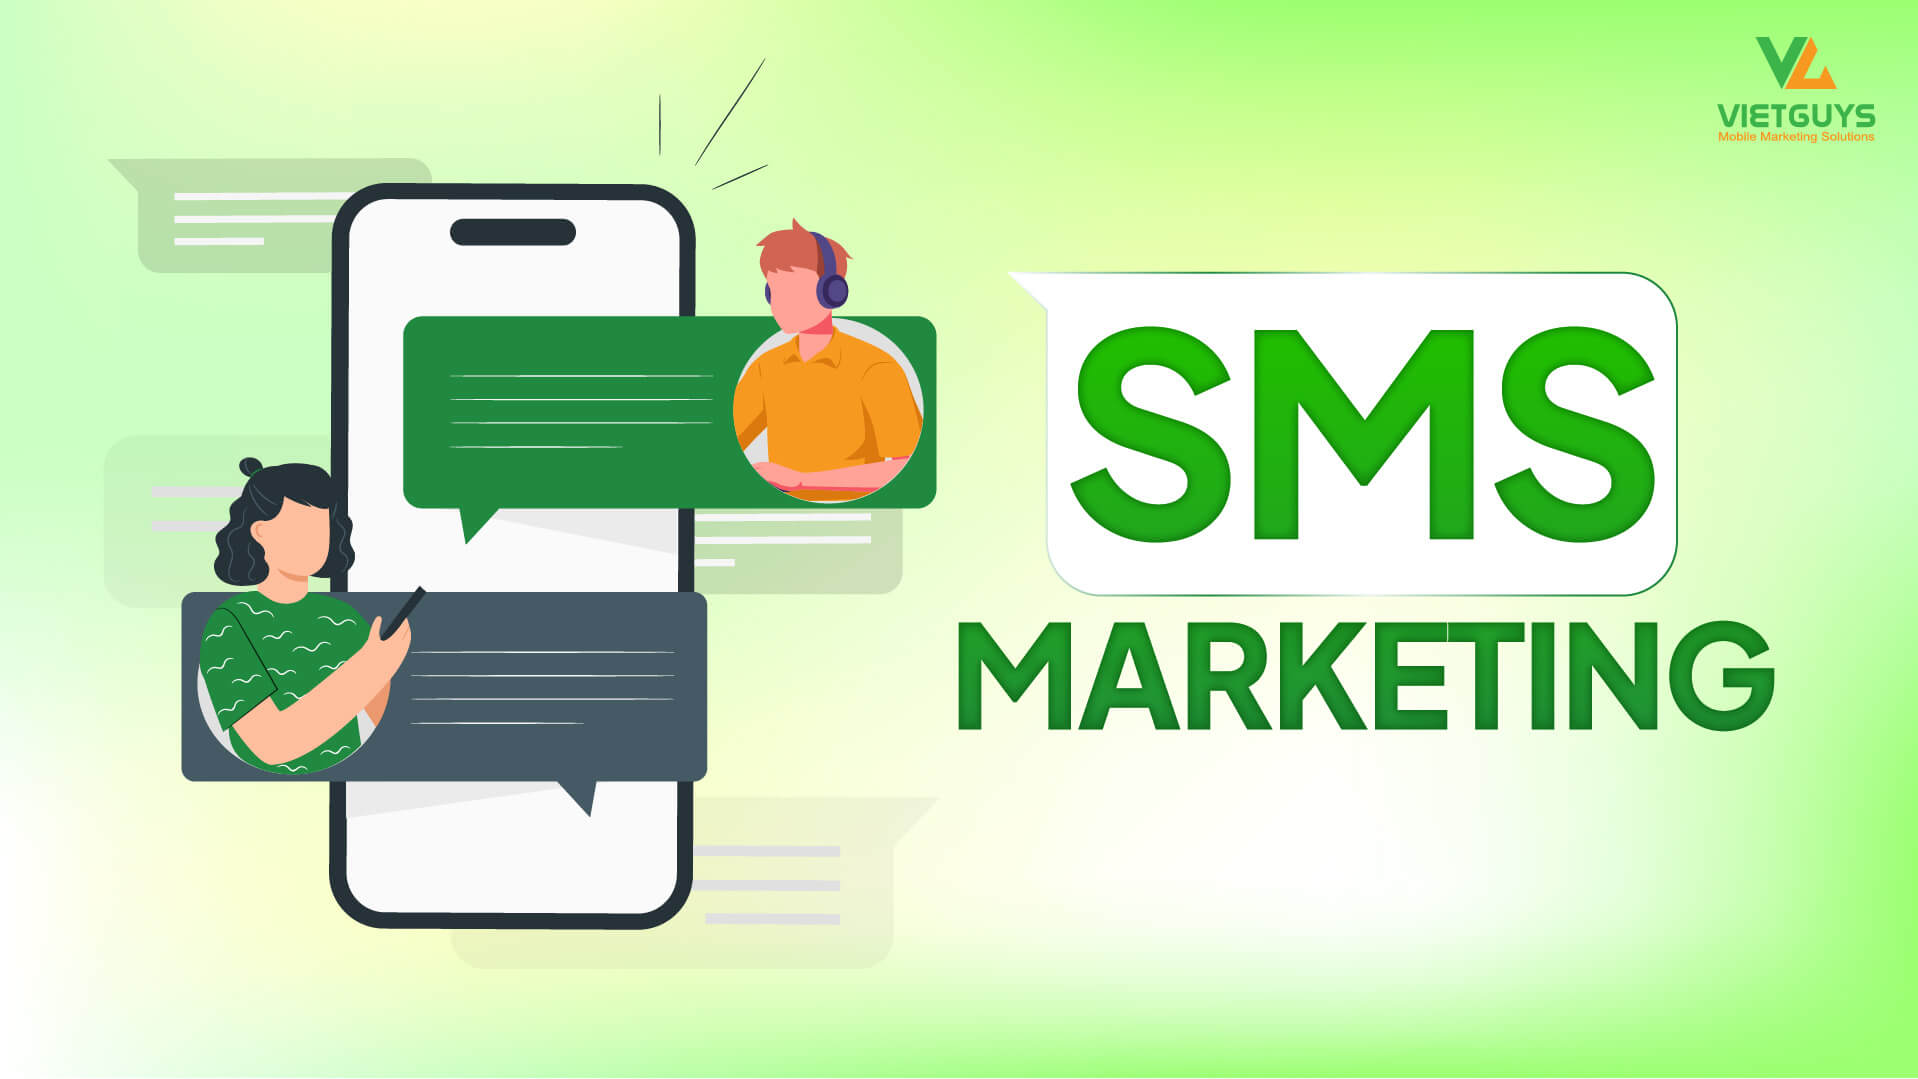 7 benefits of SMS Marketing you should know